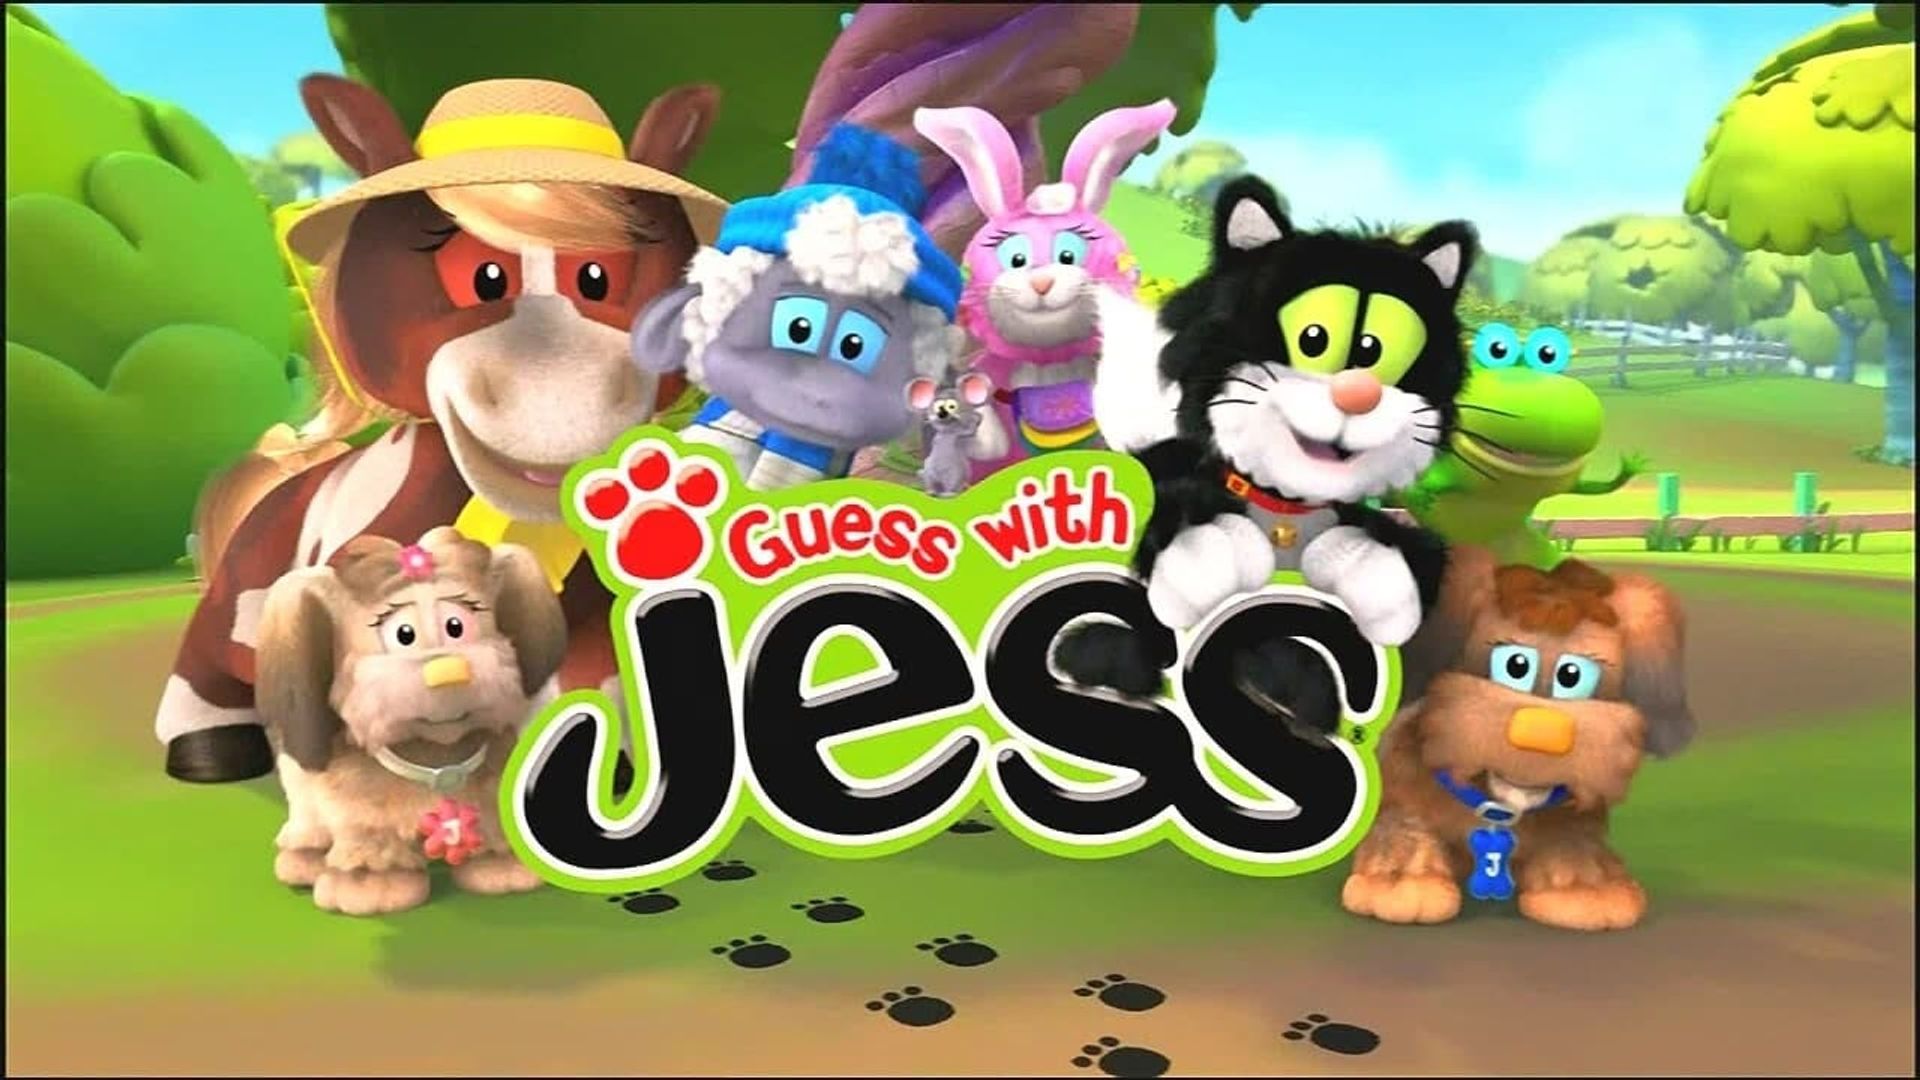 Guess with Jess background